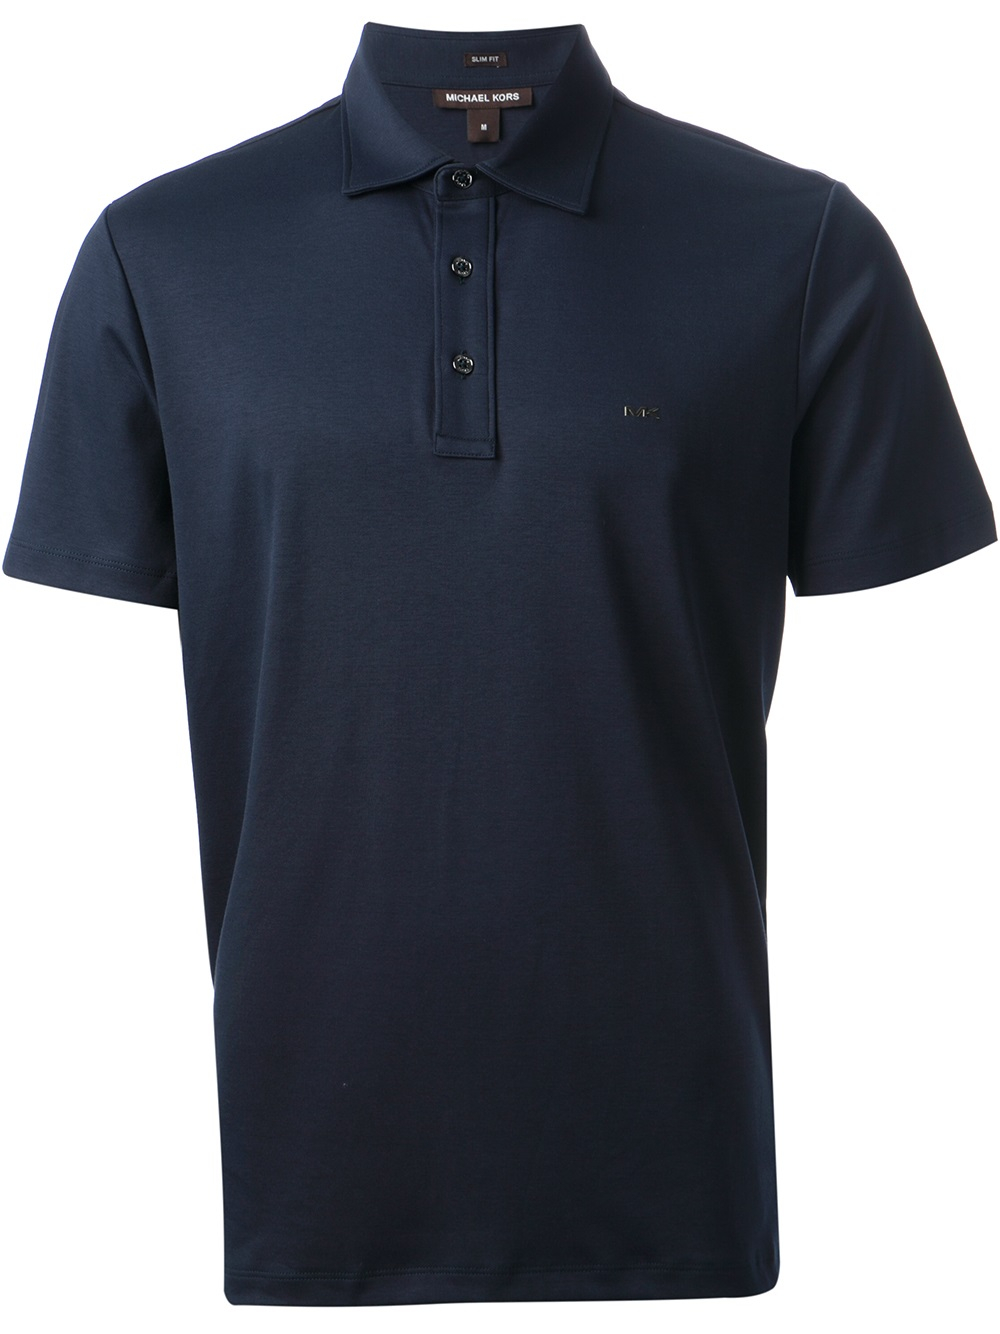 Lyst - Michael Kors Classic Polo Shirt in Blue for Men